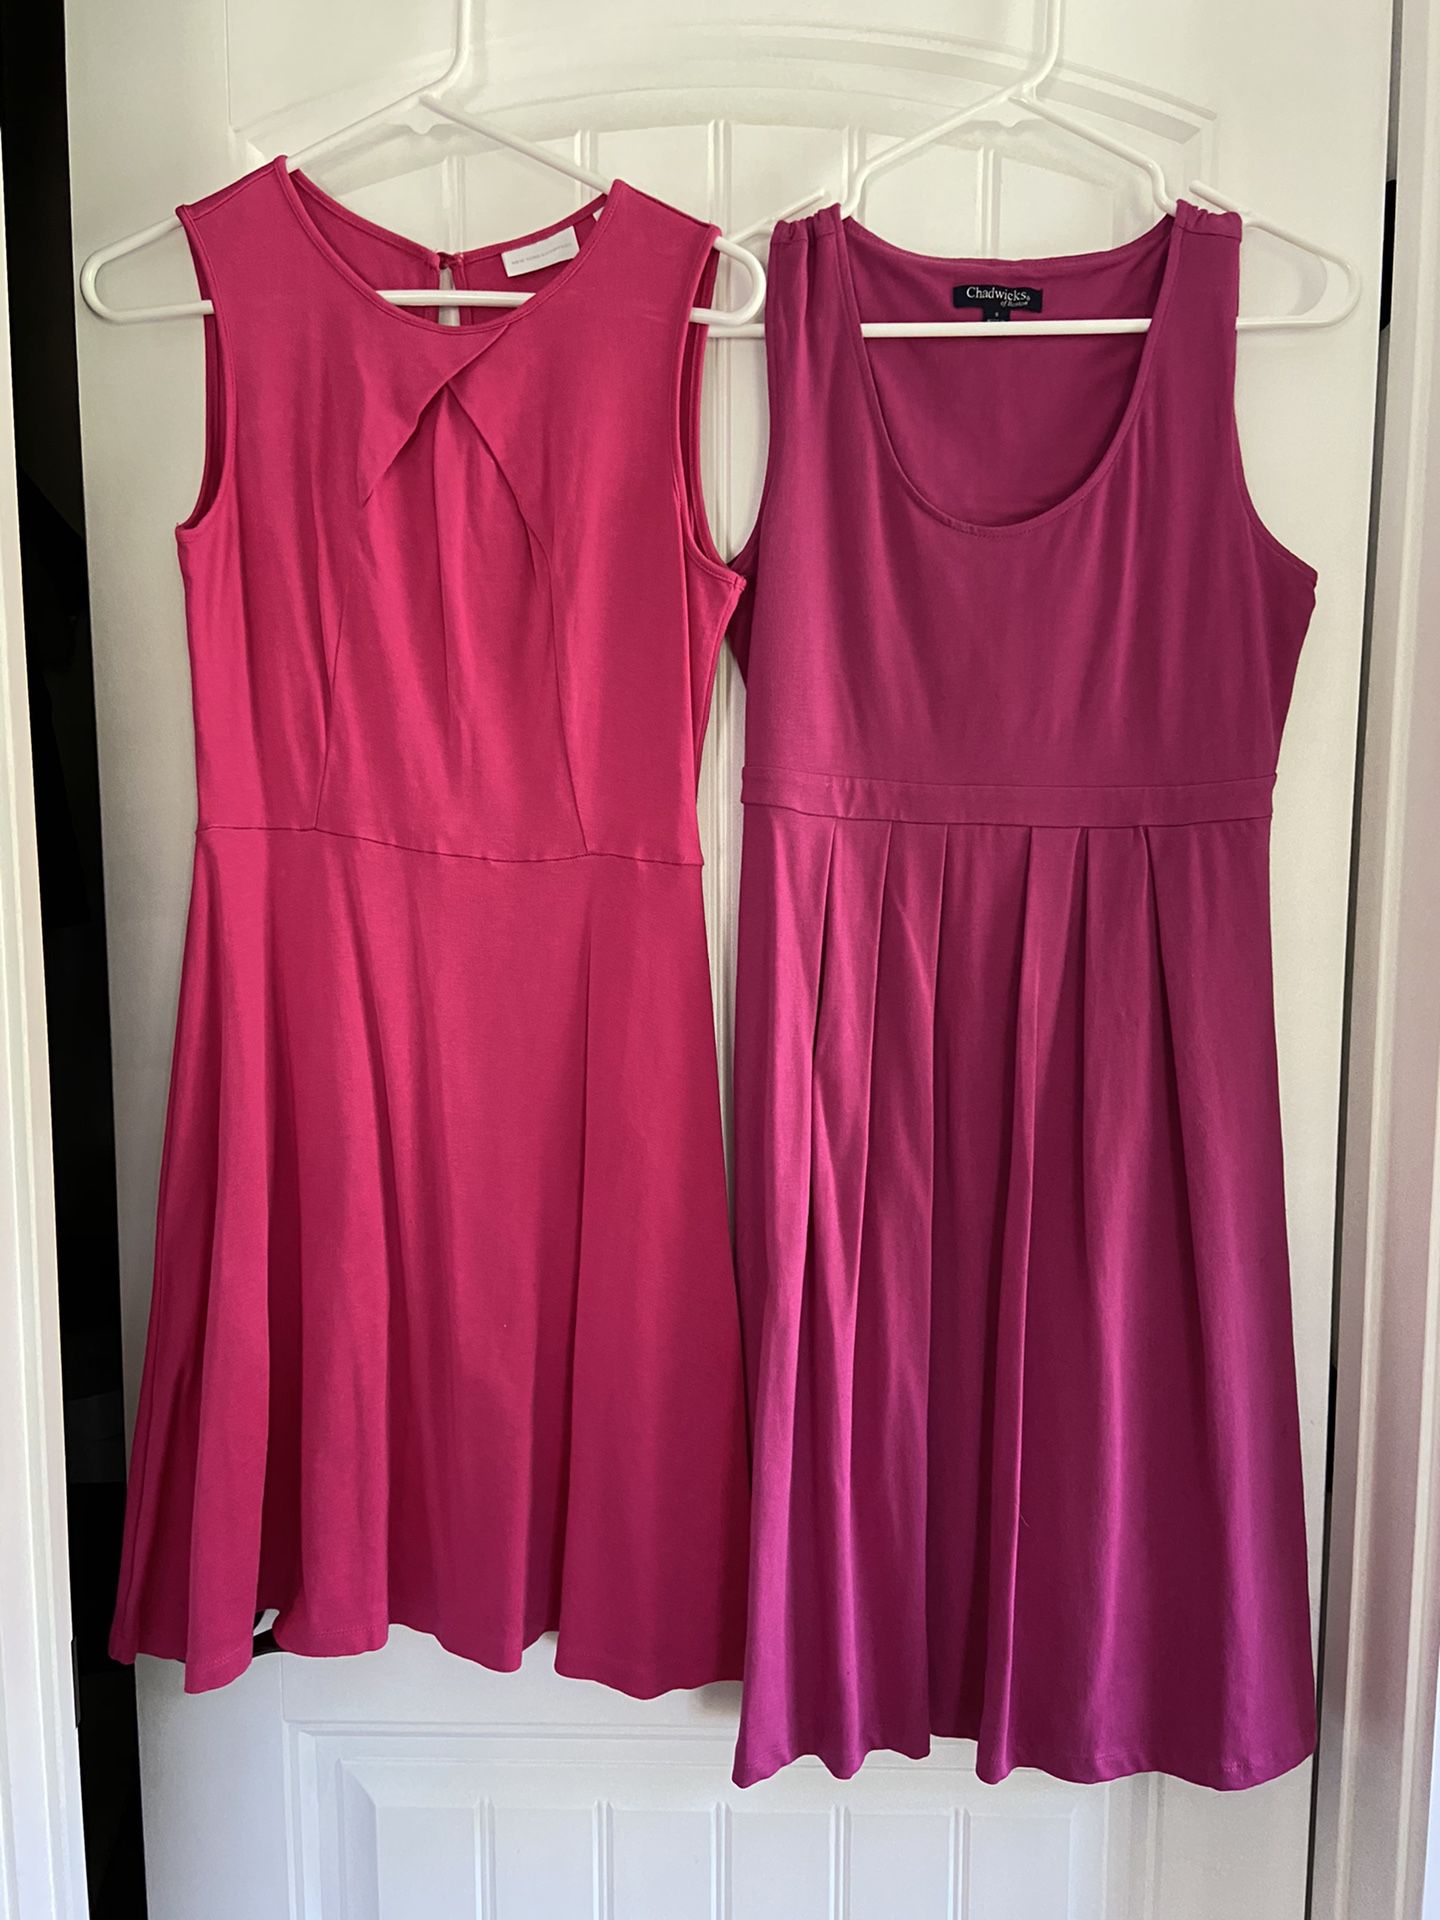 Chadwick and New York & Company summer dresses